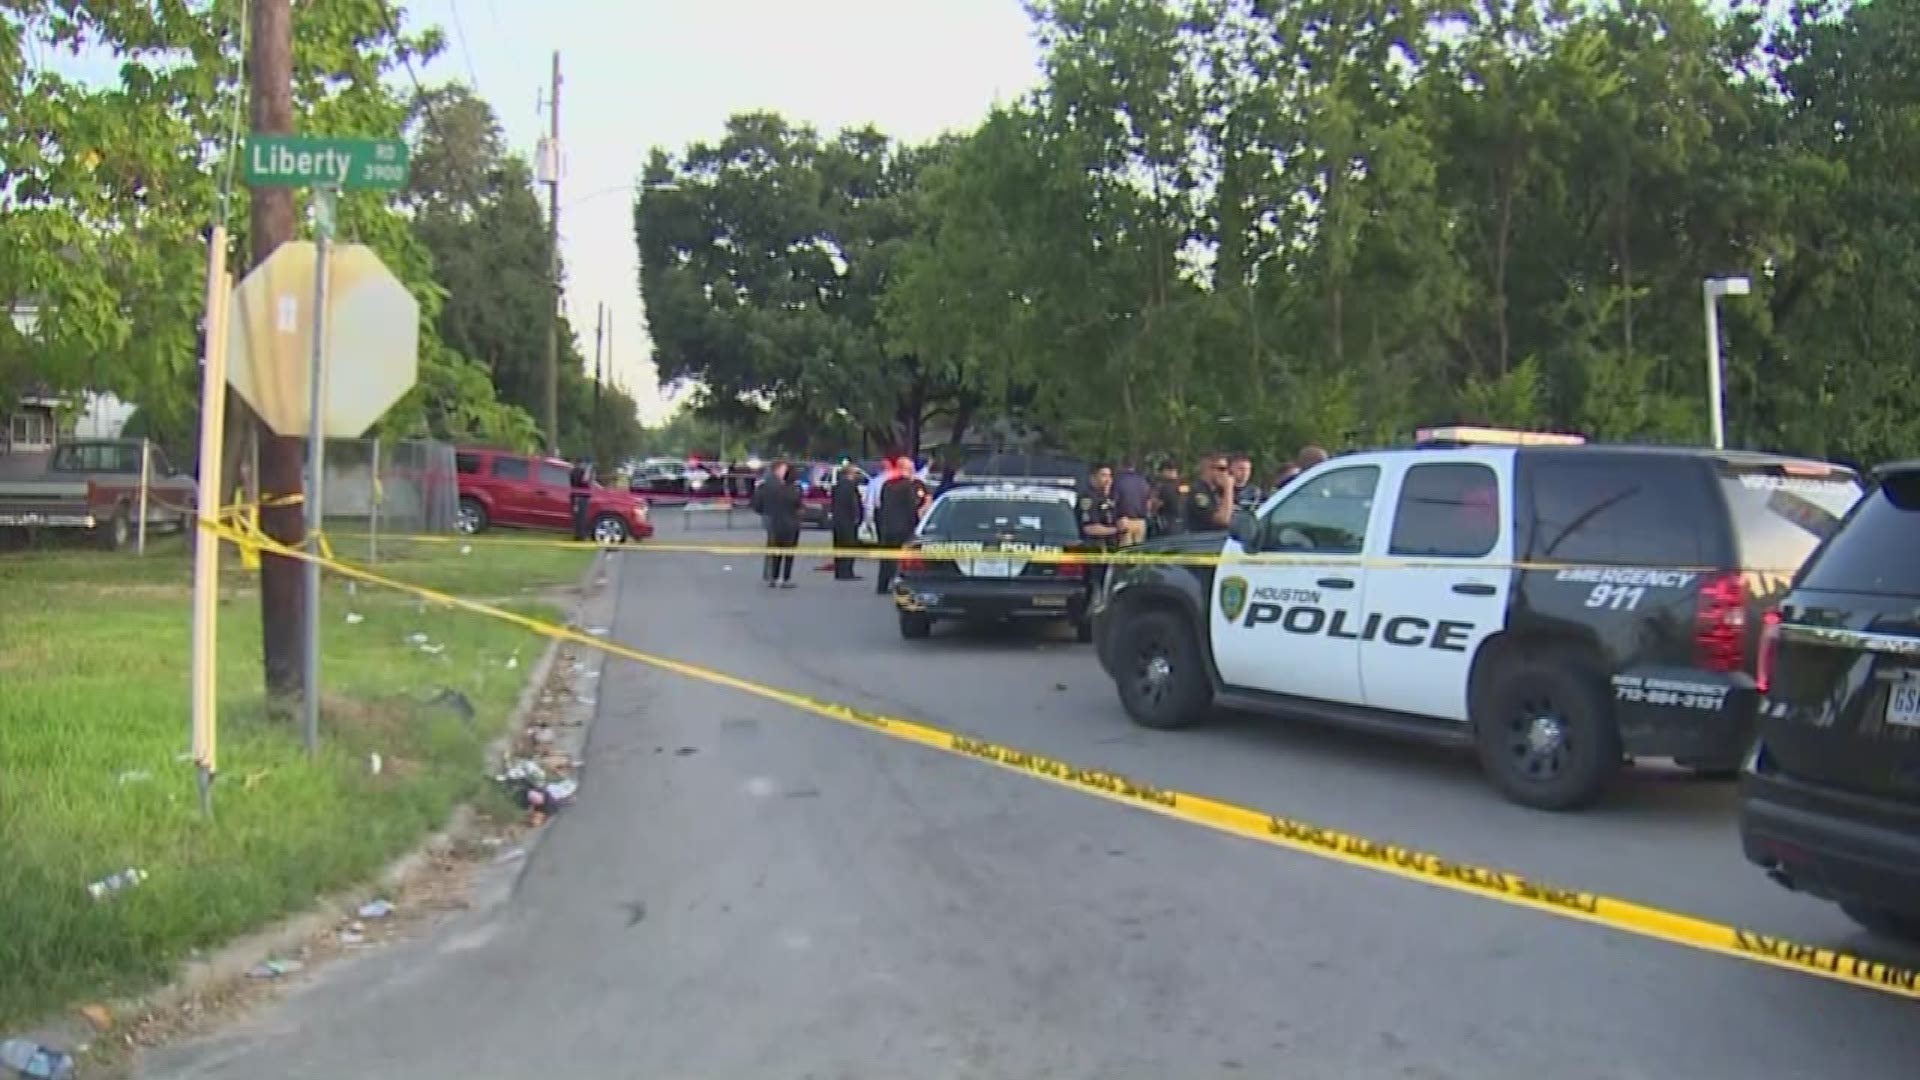 Two Houston Police officers shot a suspect Friday night after he allegedly injured two people with a gun.